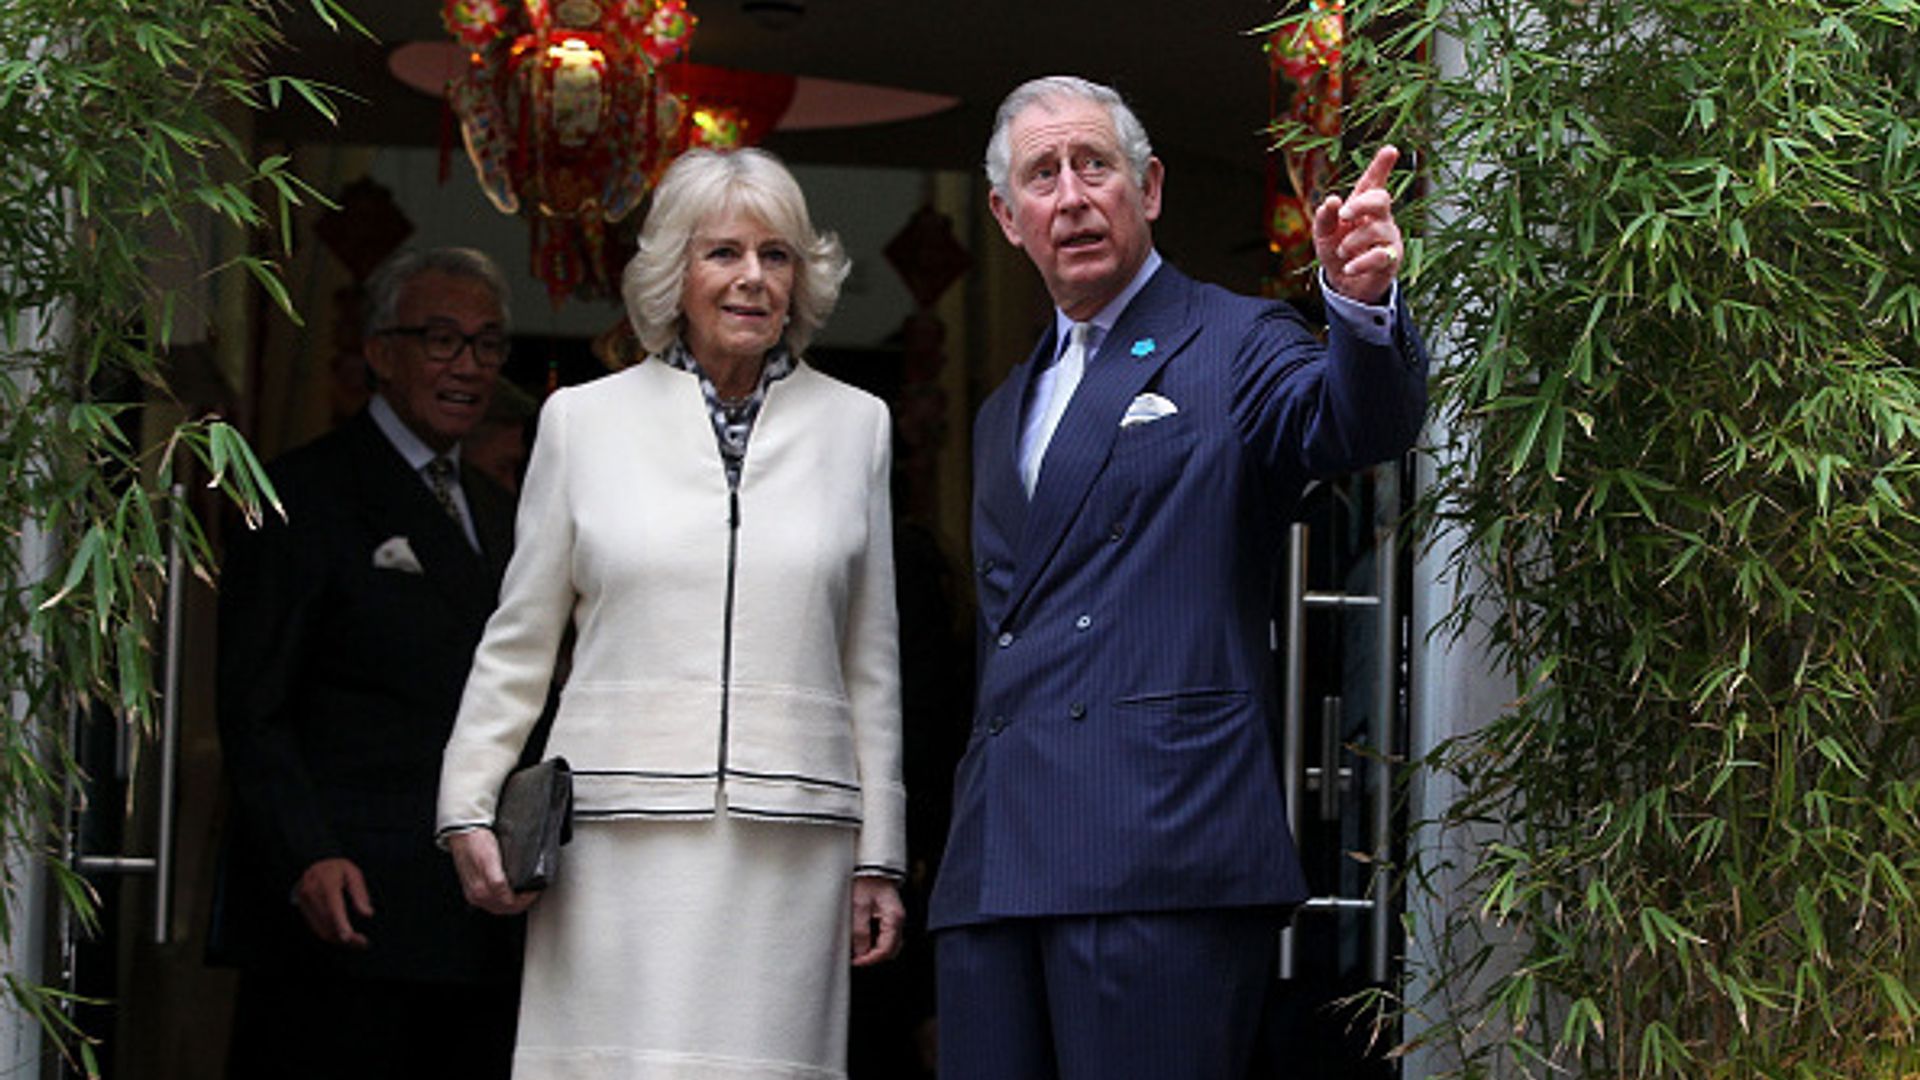 Prince Charles praises Camilla for her charm and charisma